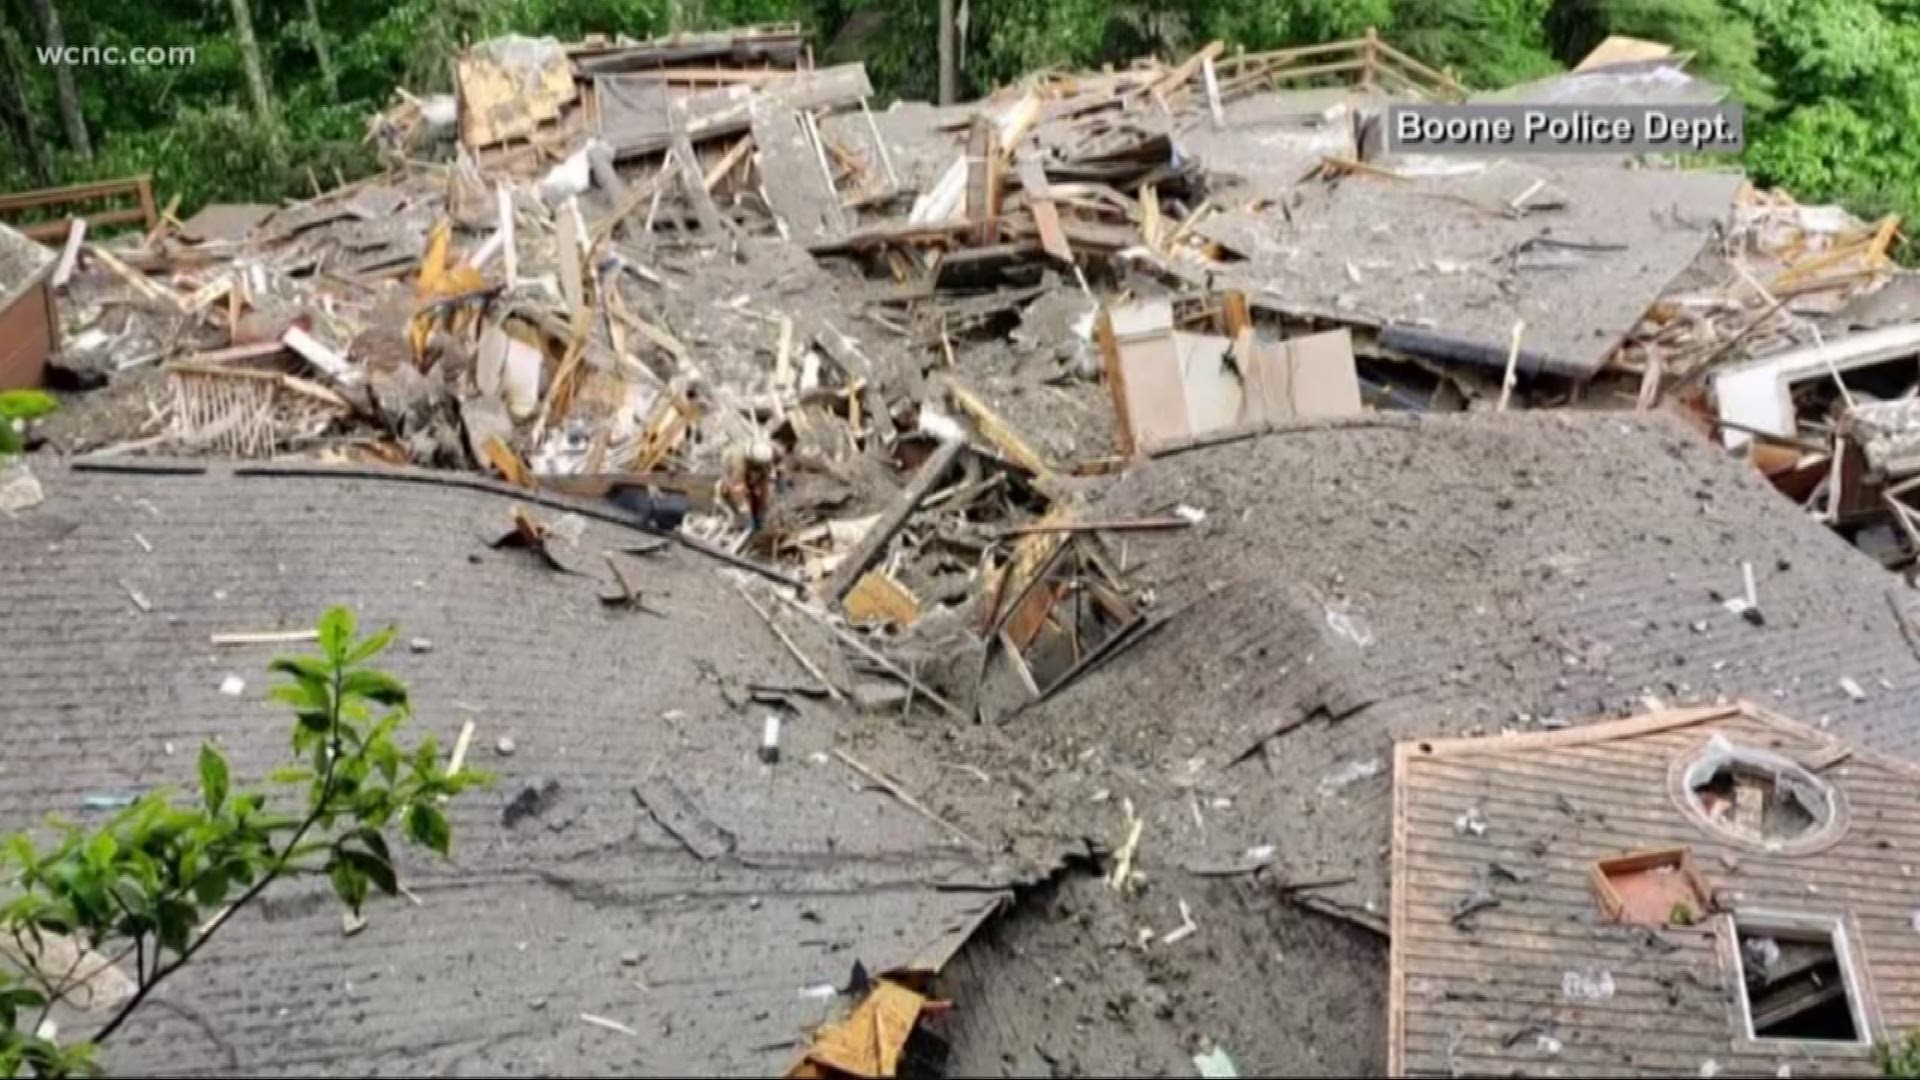 Two people were killed when a landslide destroyed a home in Watauga County Wednesday.